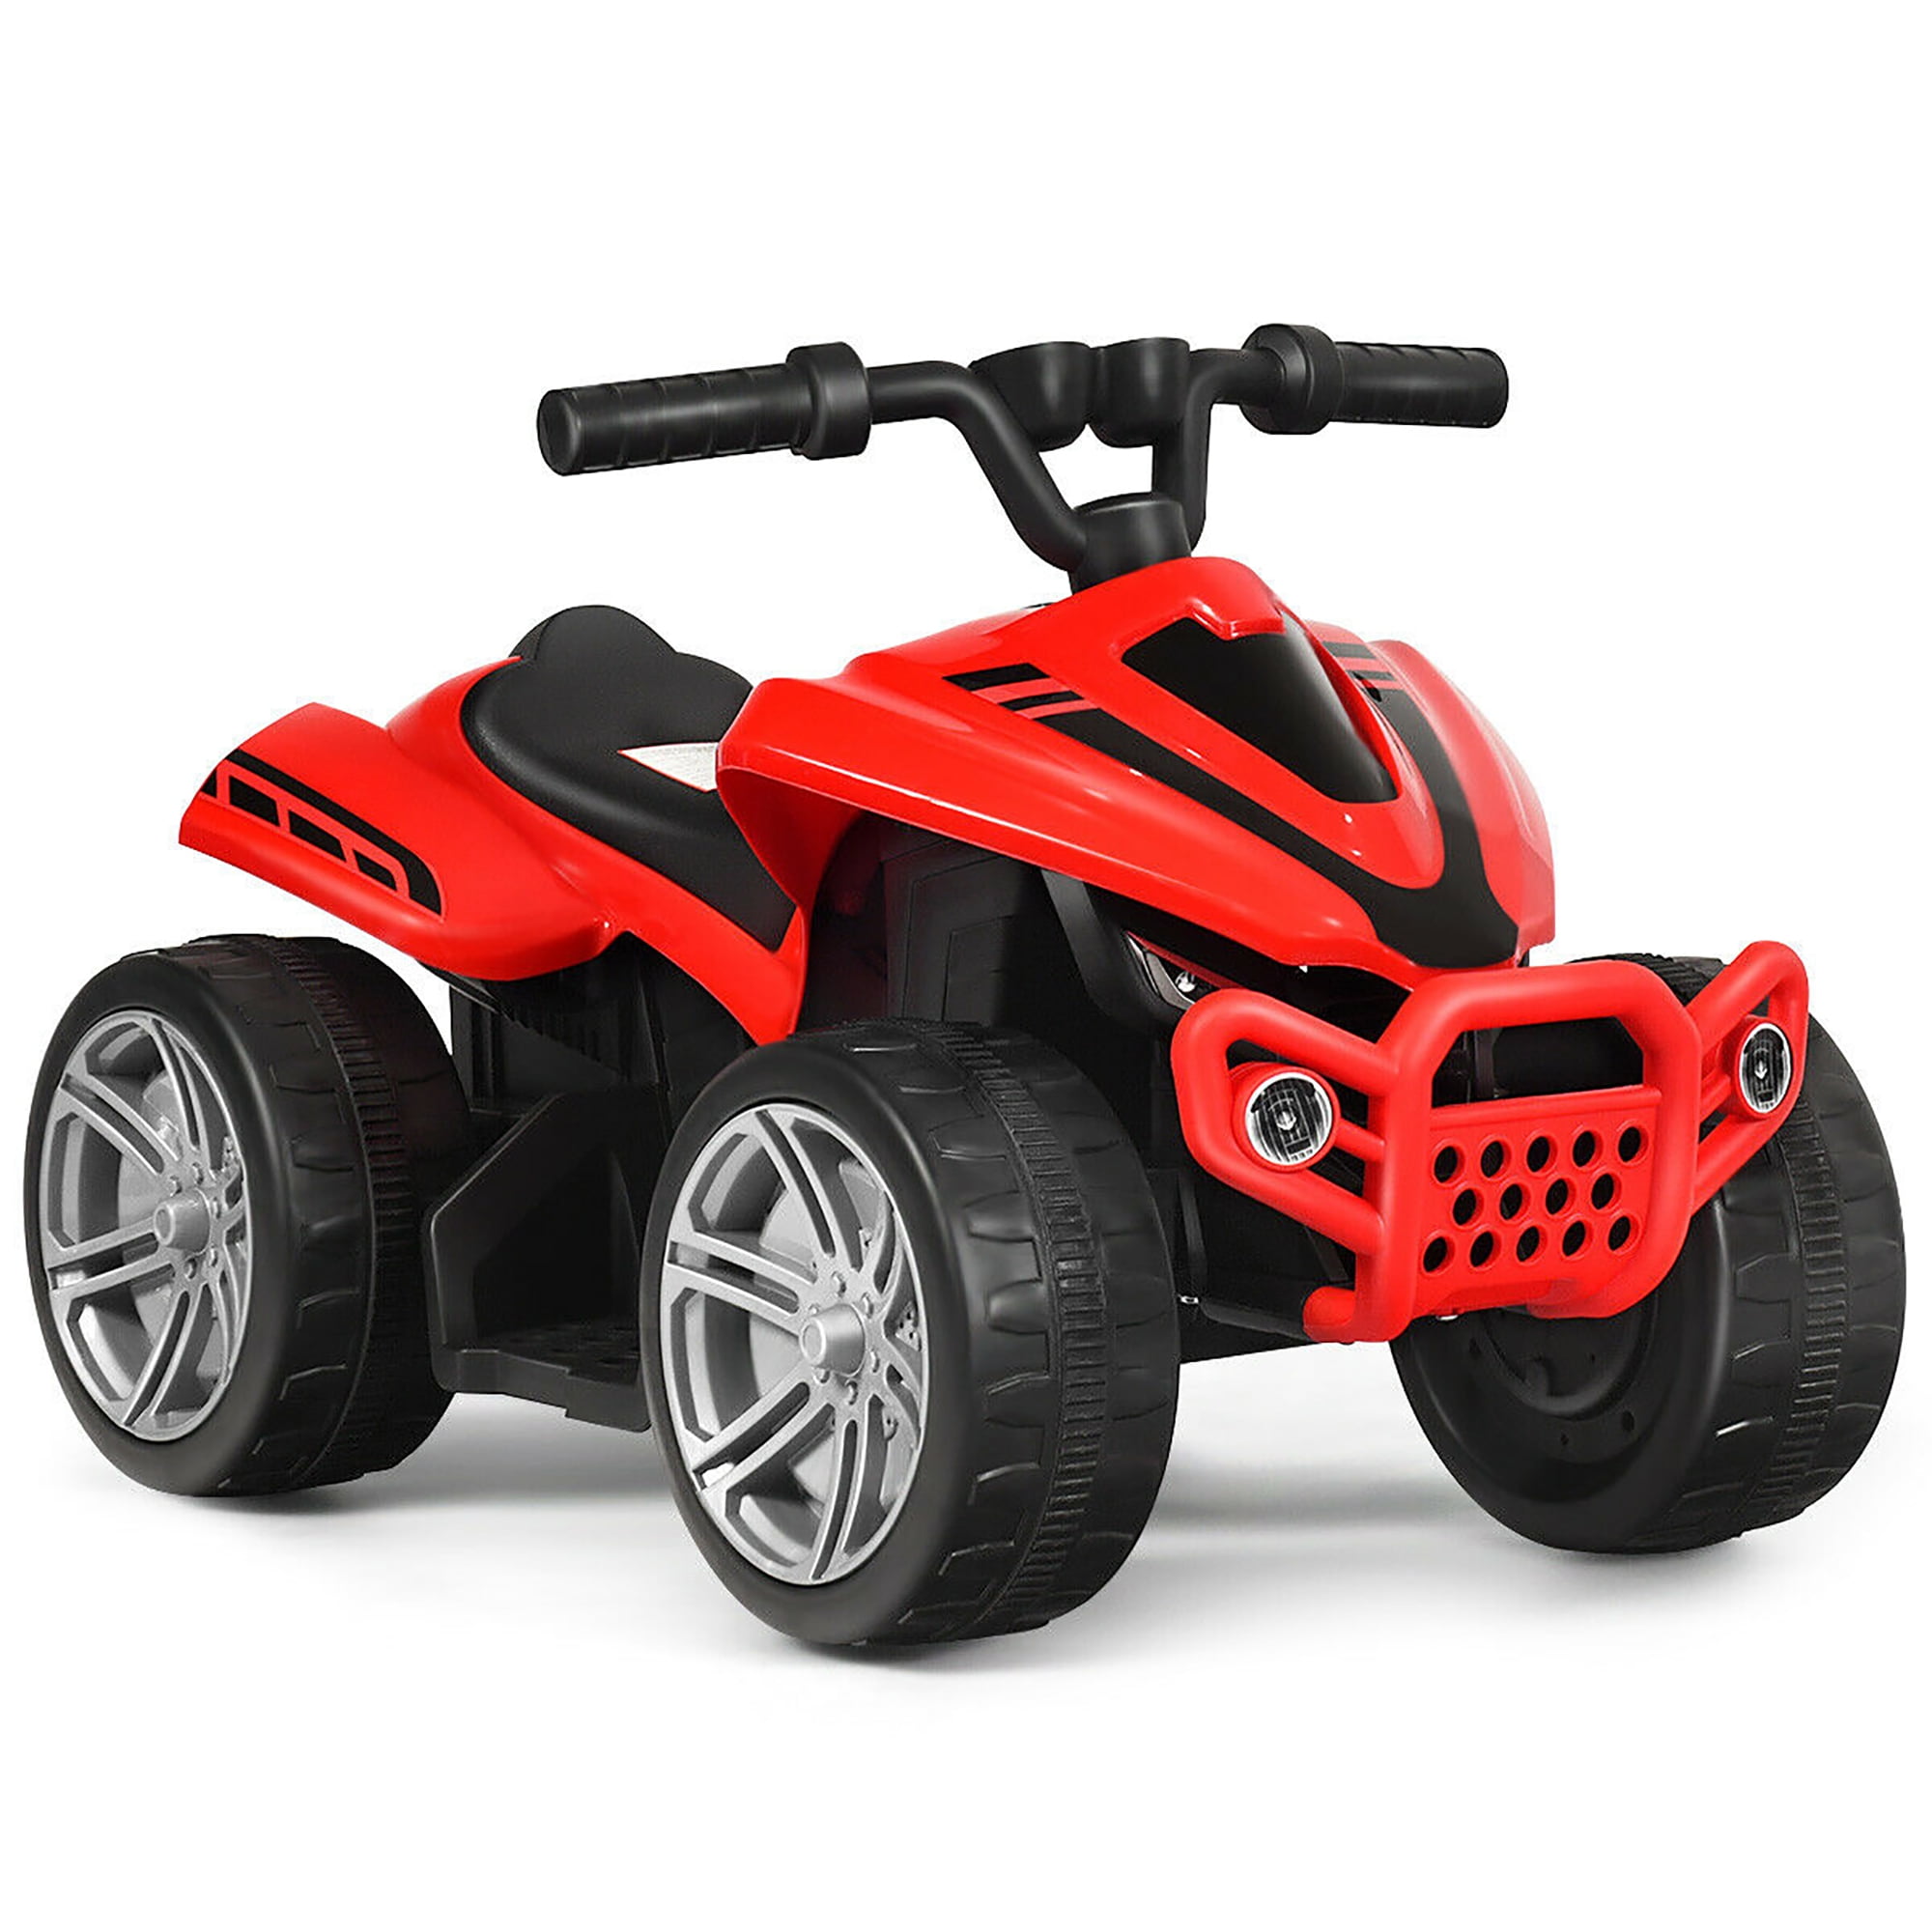 6 Volt Black Honda TRX Battery Powered Ride On Toy ATV Outdoor Fun Toddlers New 